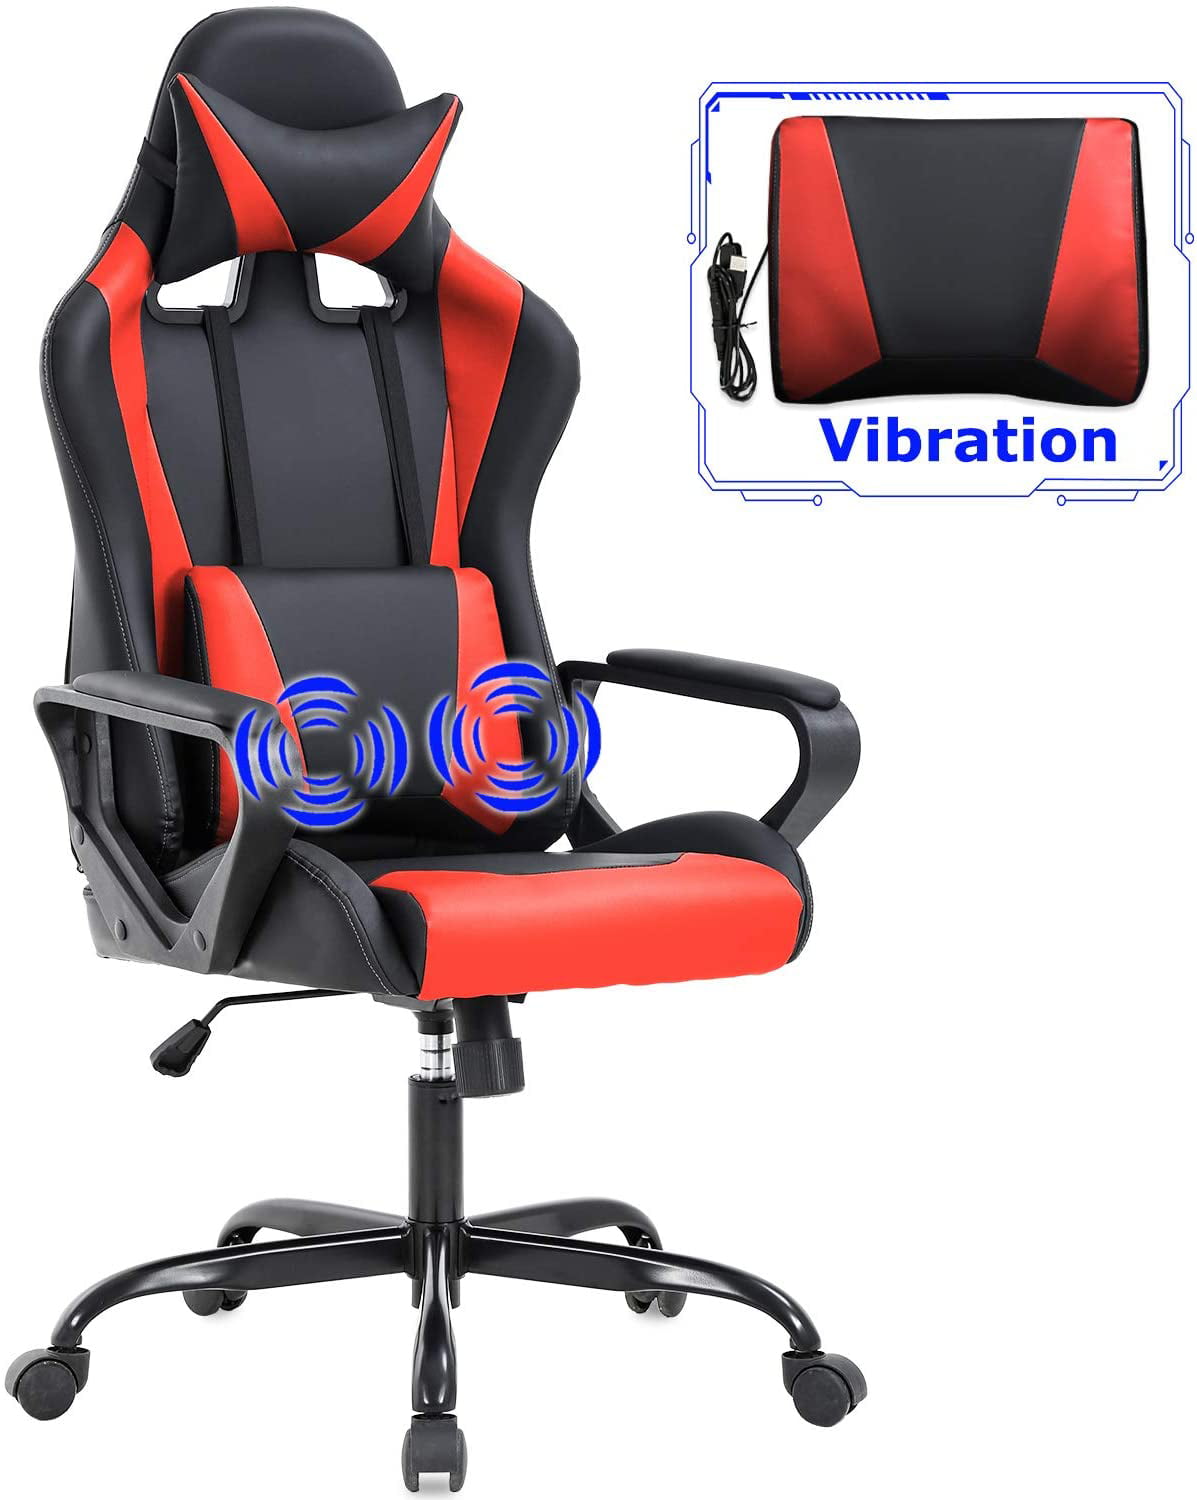 New Gaming Chair Vs Office Chair Quora for Large Space